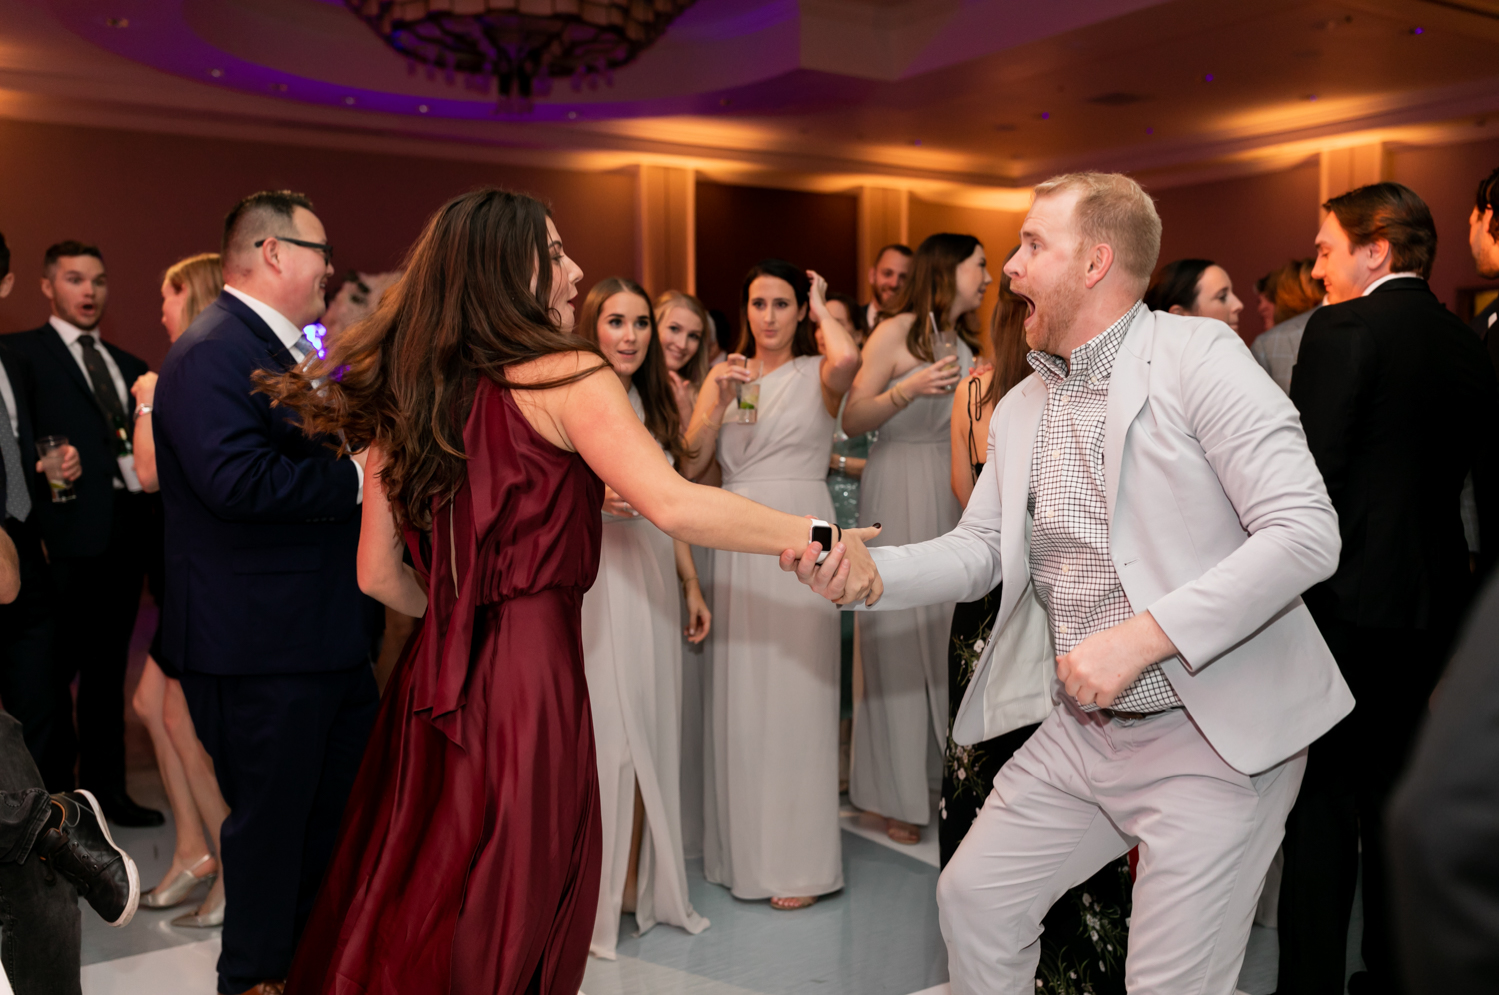 Guests laugh and dance at the reception.